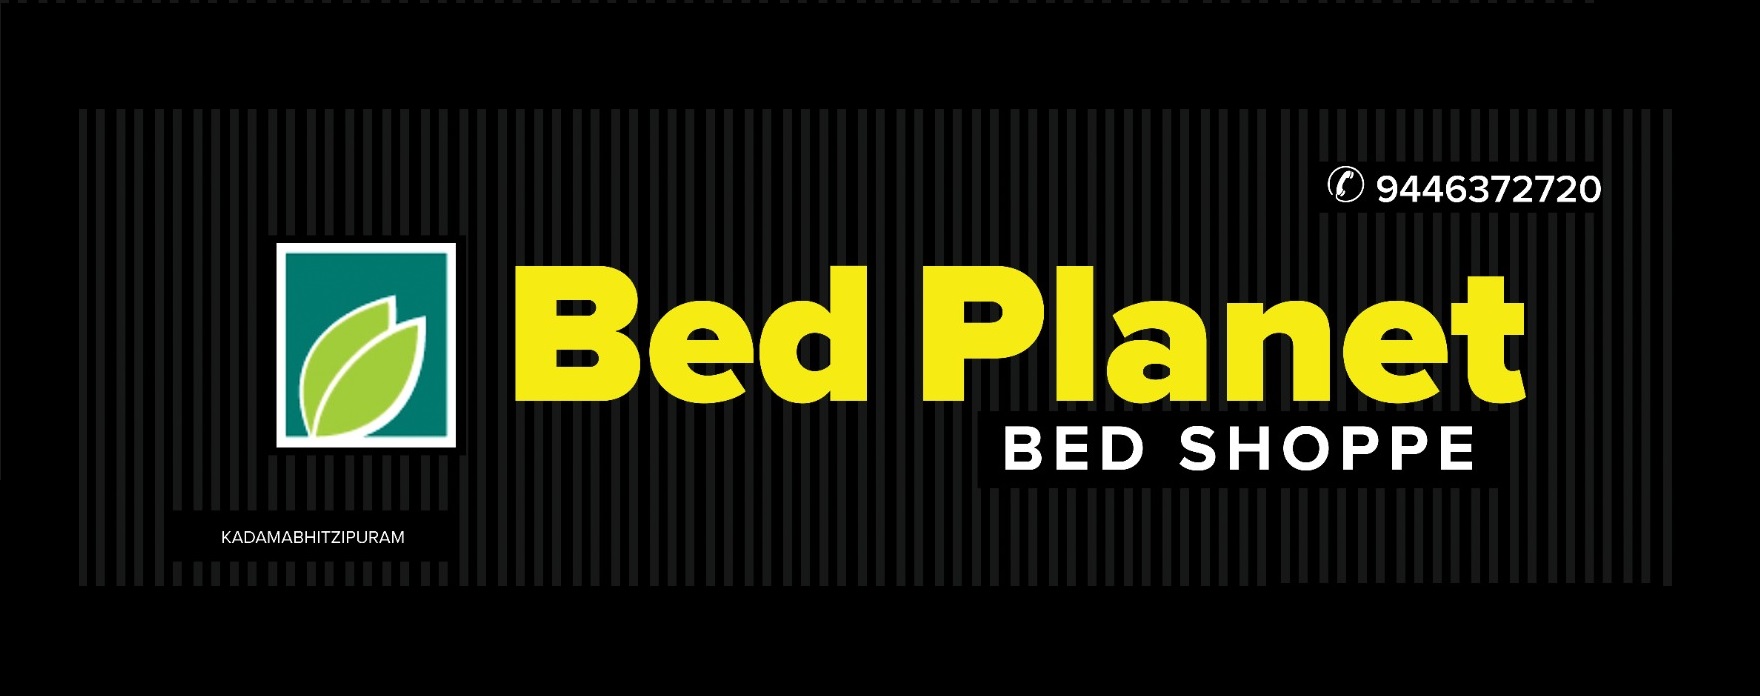 Bed Planet- Best Bed Shop in...